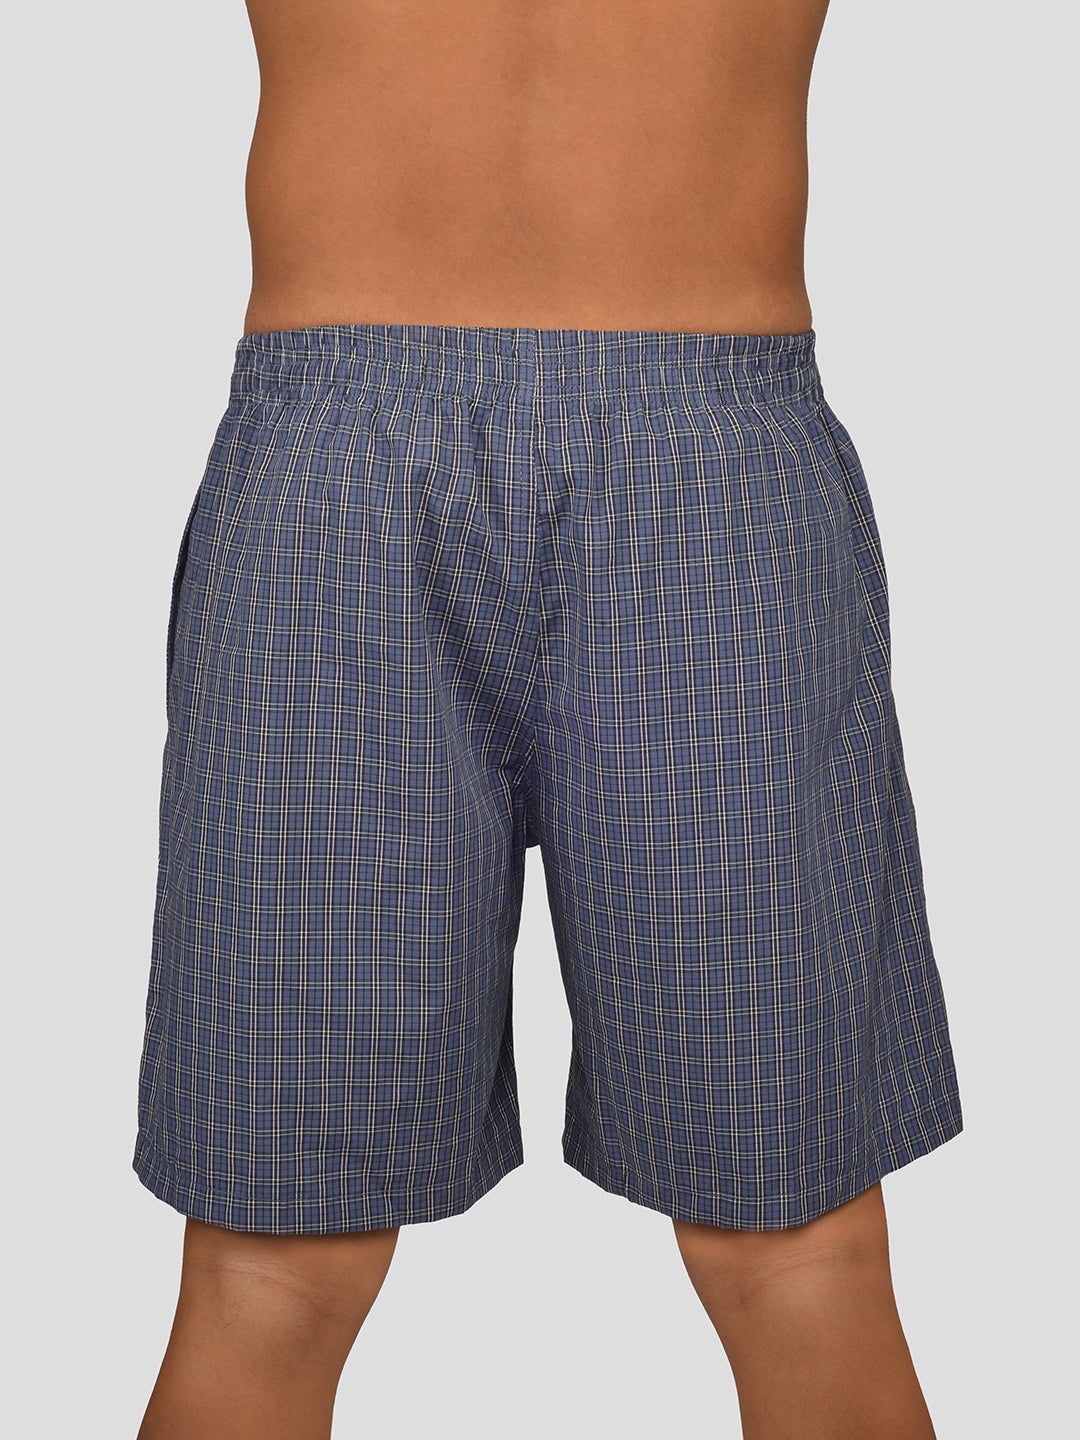 Buy VIP Men's Cotton Boxer Shorts with Side Pockets (Pack of 2